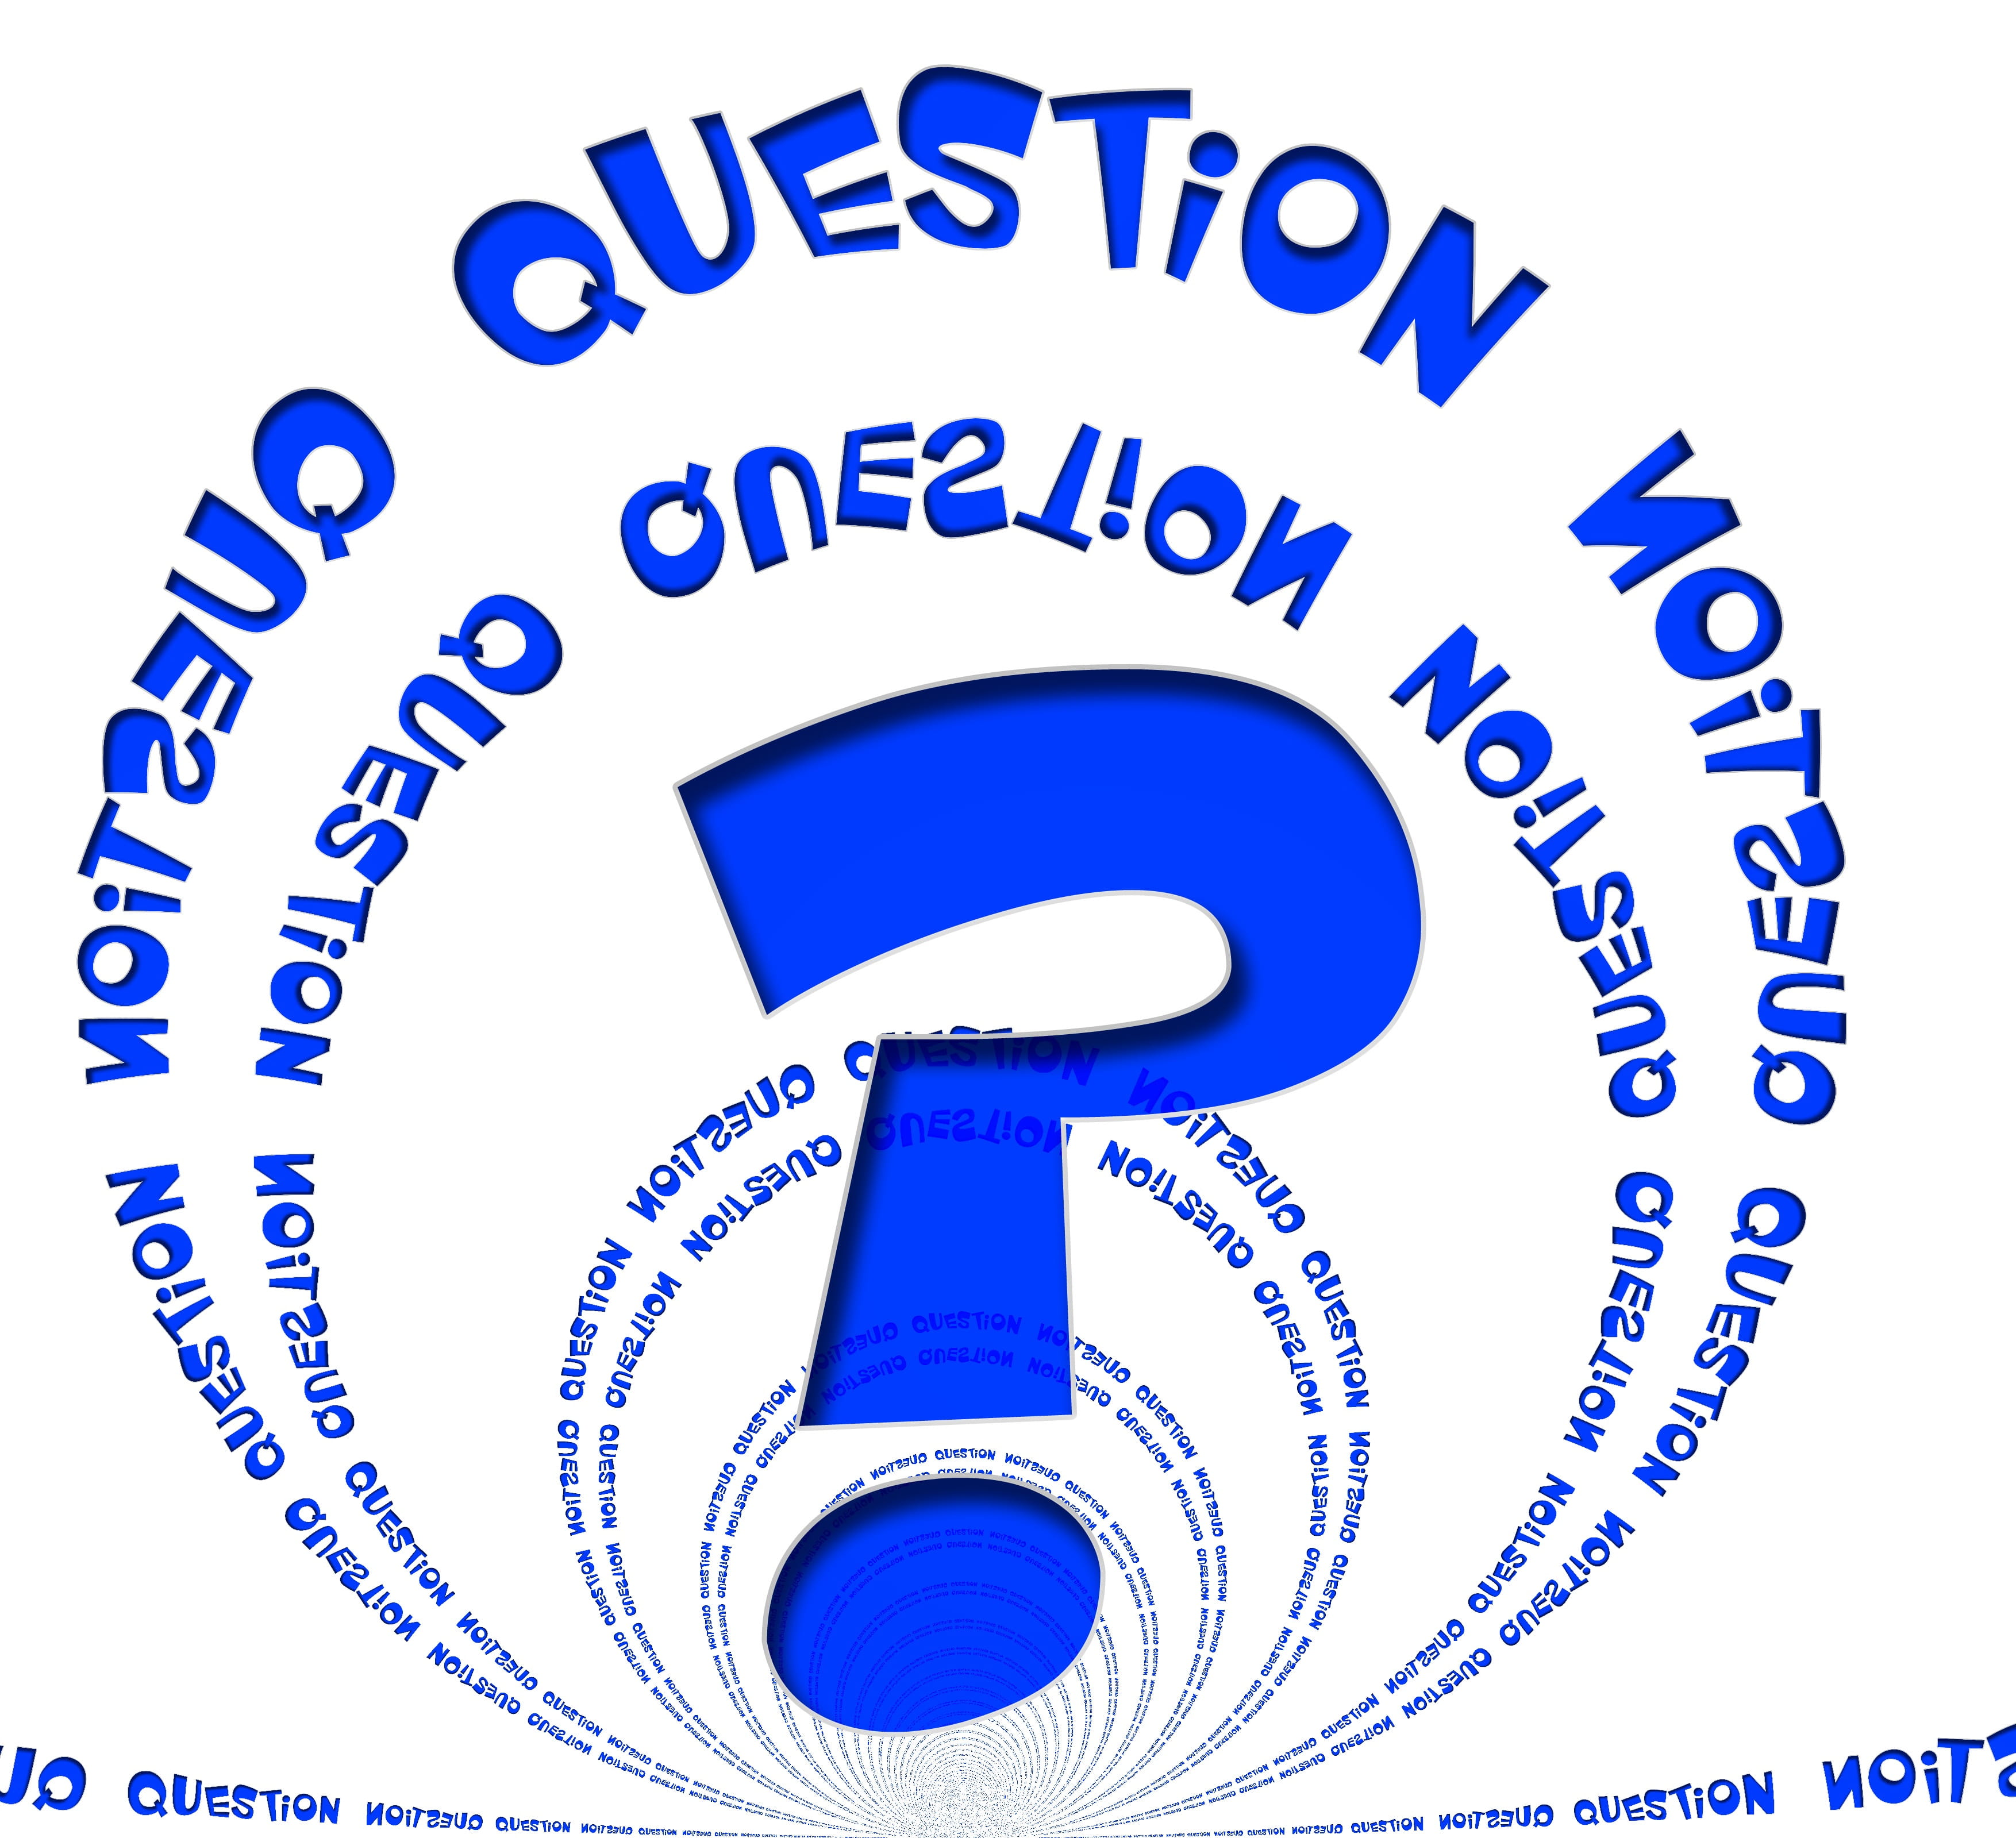 Question Mark, Punctuation Marks, request, matter, requests, response